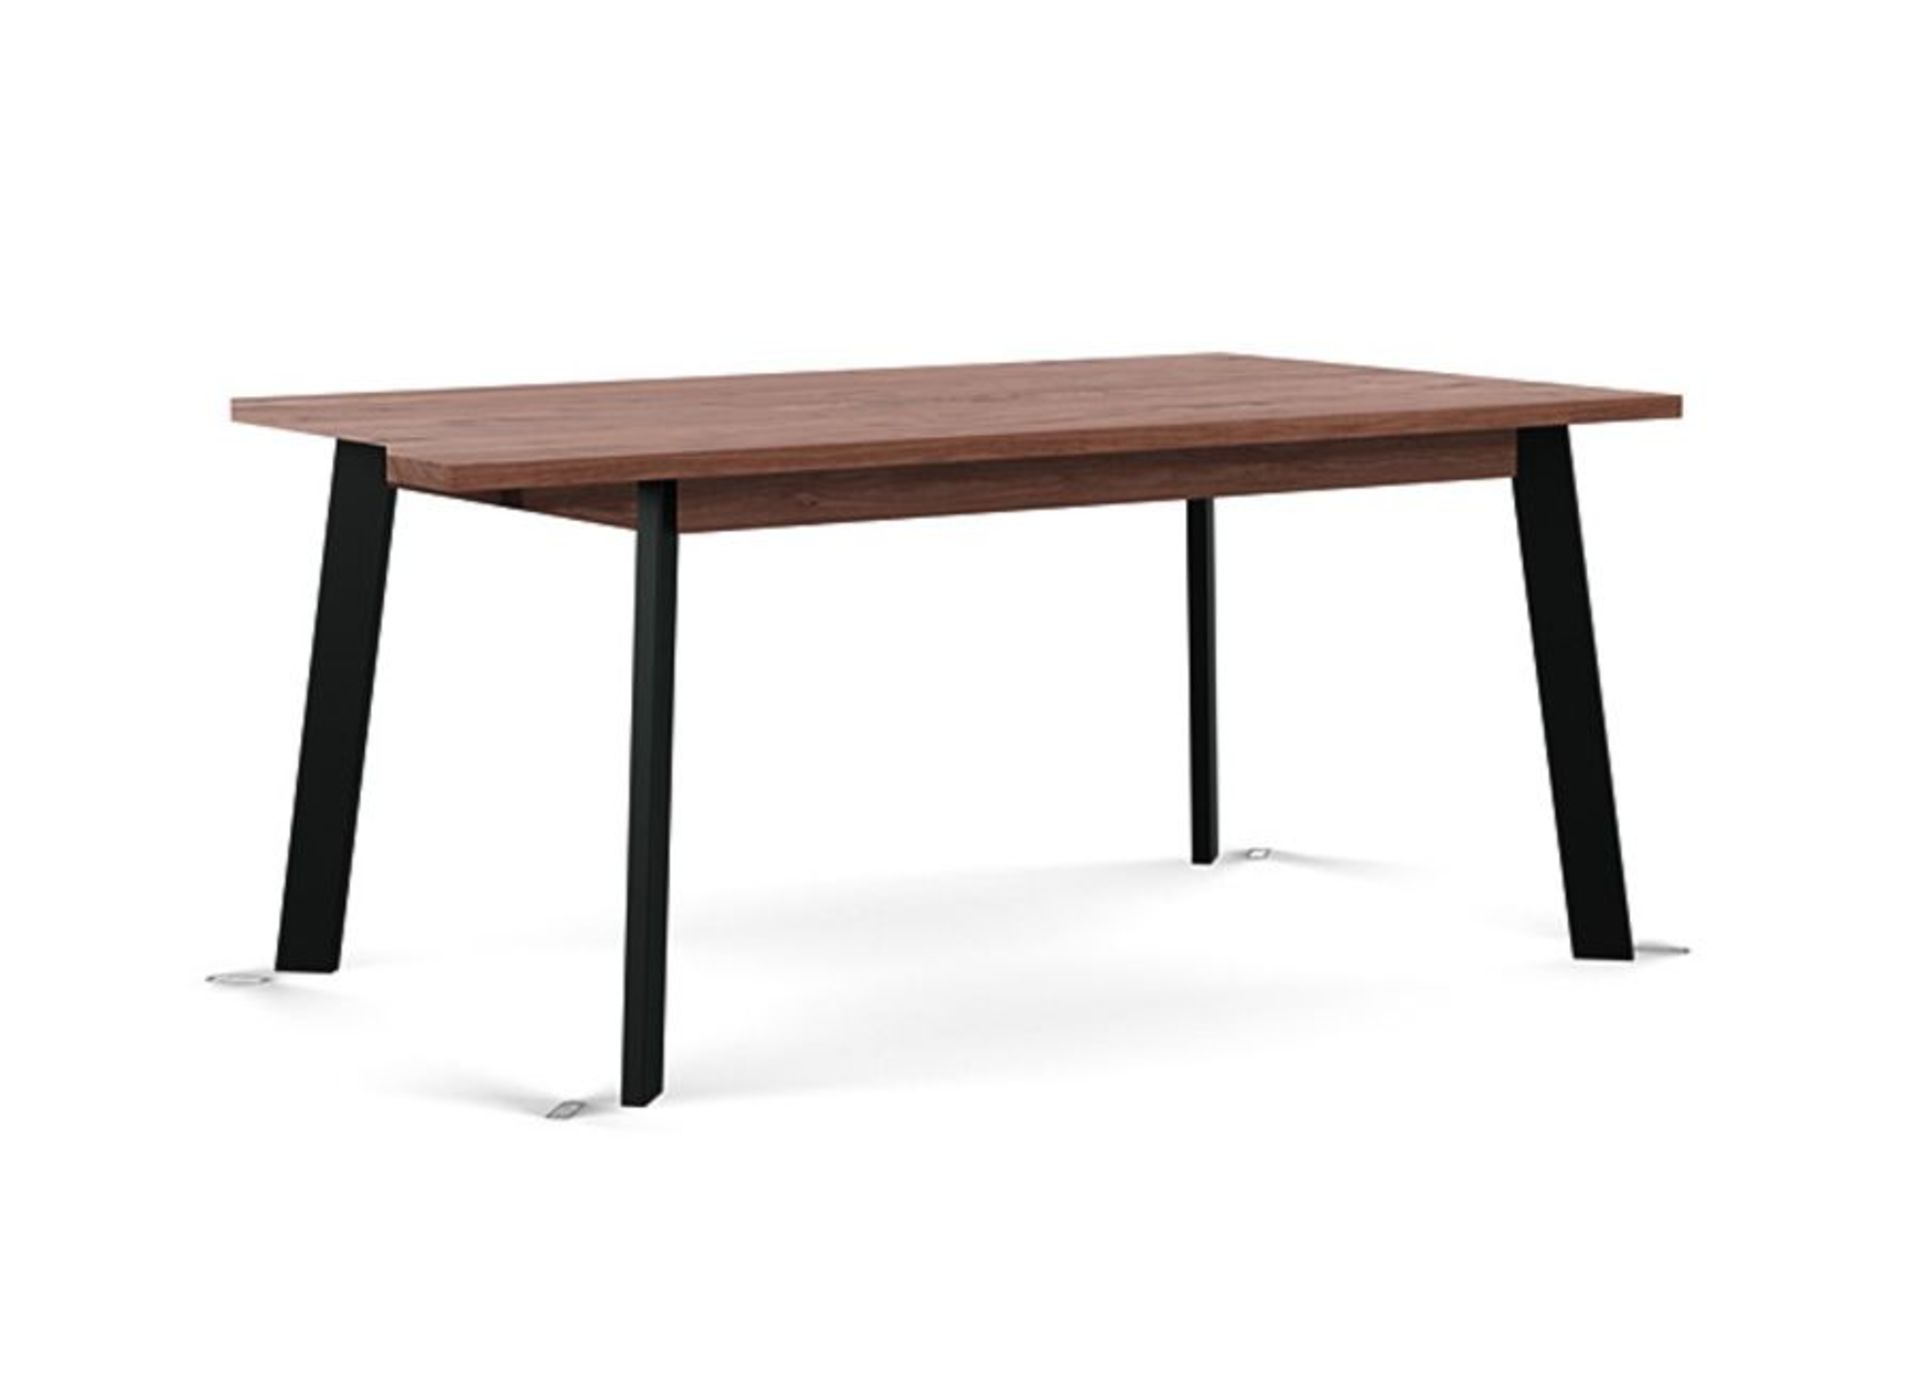 The Nova Dining Table optimises your space thanks to its integrated double butterfly mechanism to